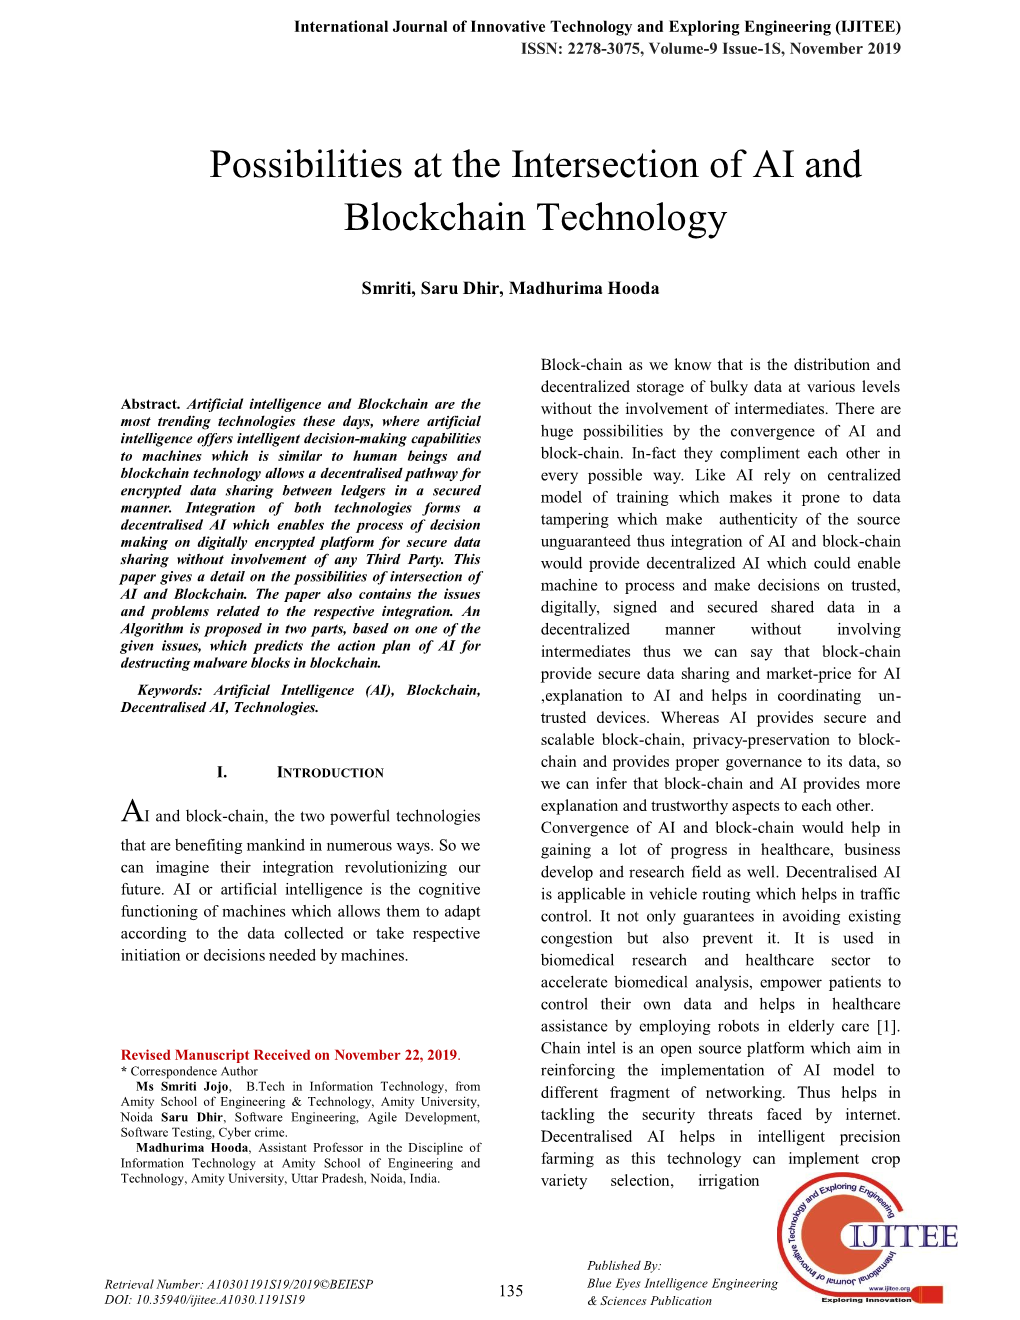 Possibilities at the Intersection of AI and Blockchain Technology